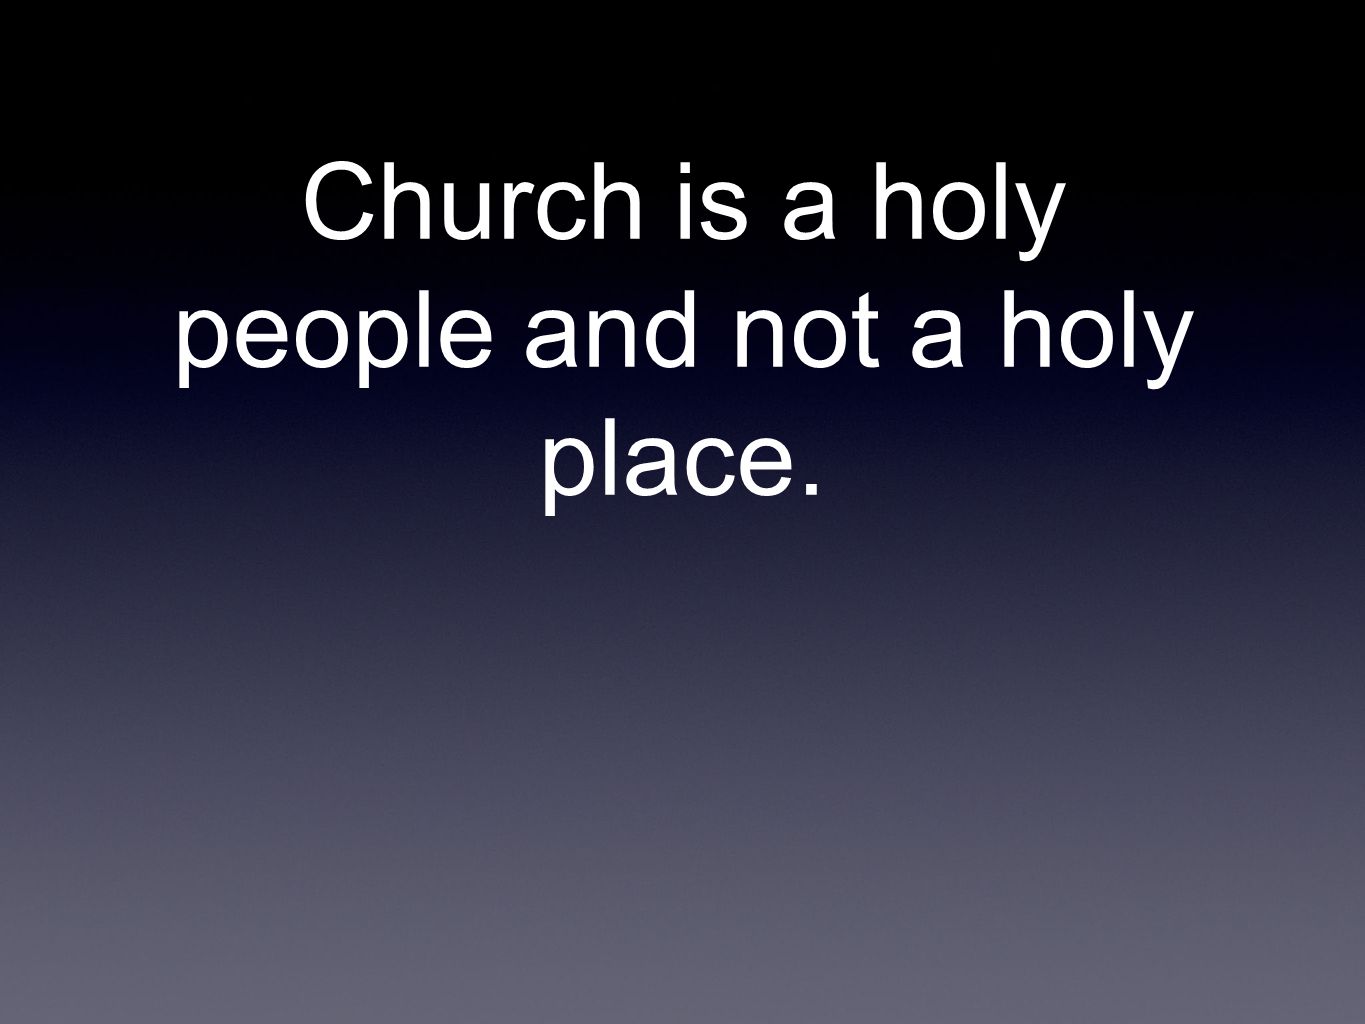 Church is a holy people and not a holy place.